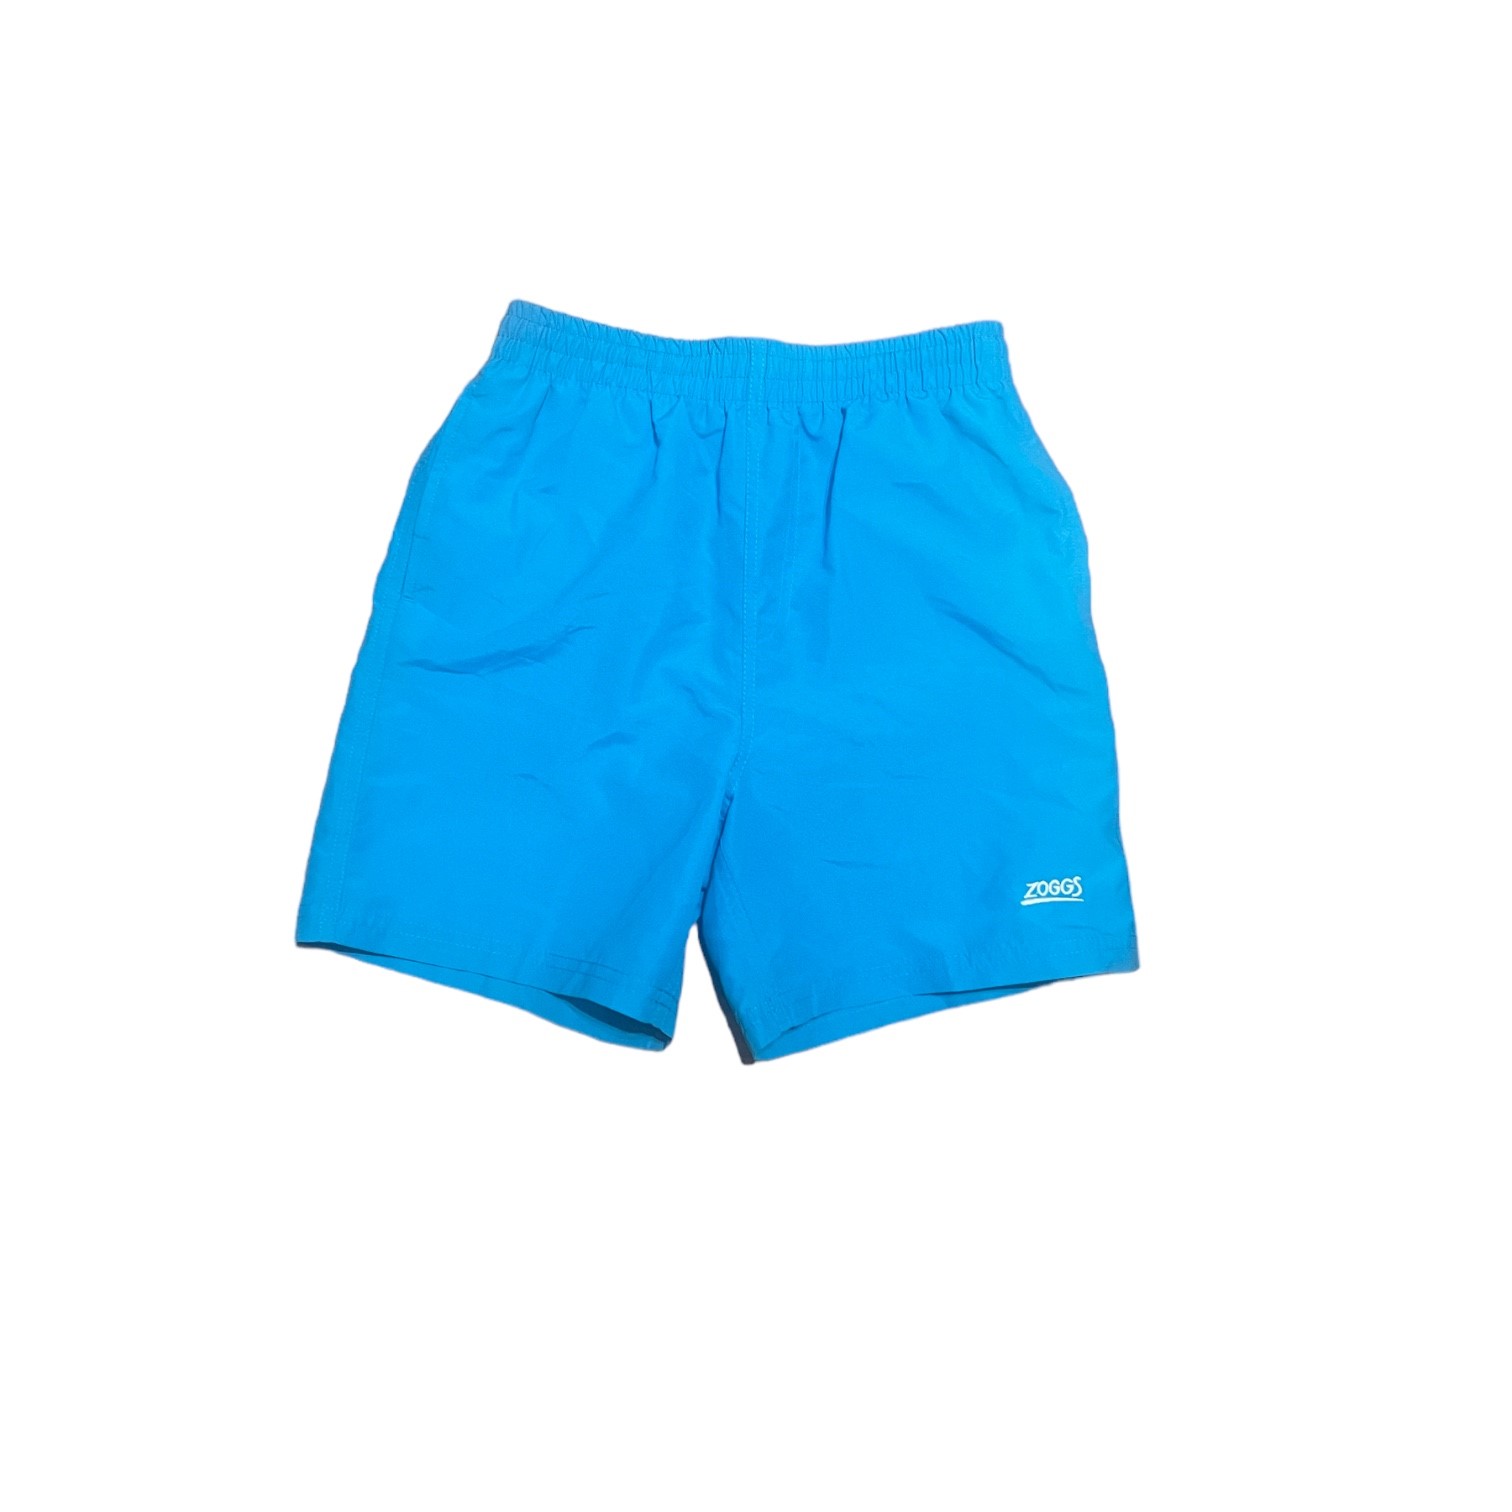 Zoggs barn Shorts 140cl - 150cl